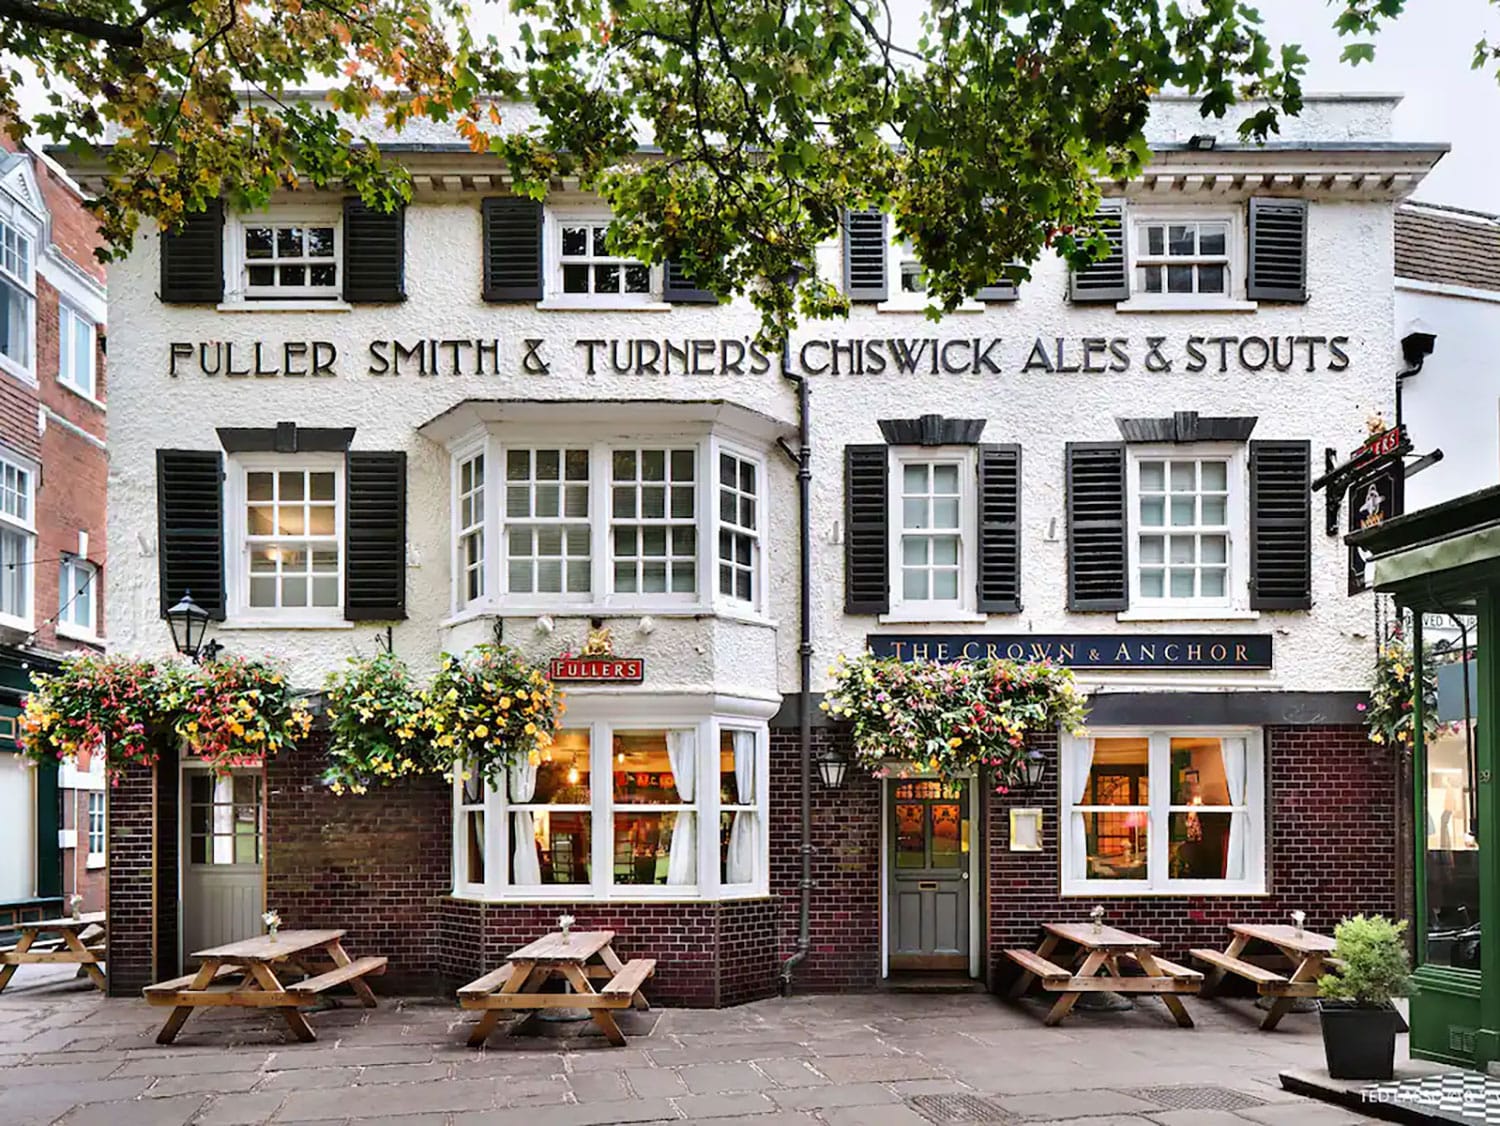 The exterior view of The Prince’s Head pub in Richmond, England, where the Crown and Anchor scenes are filmed for Ted Lasso.